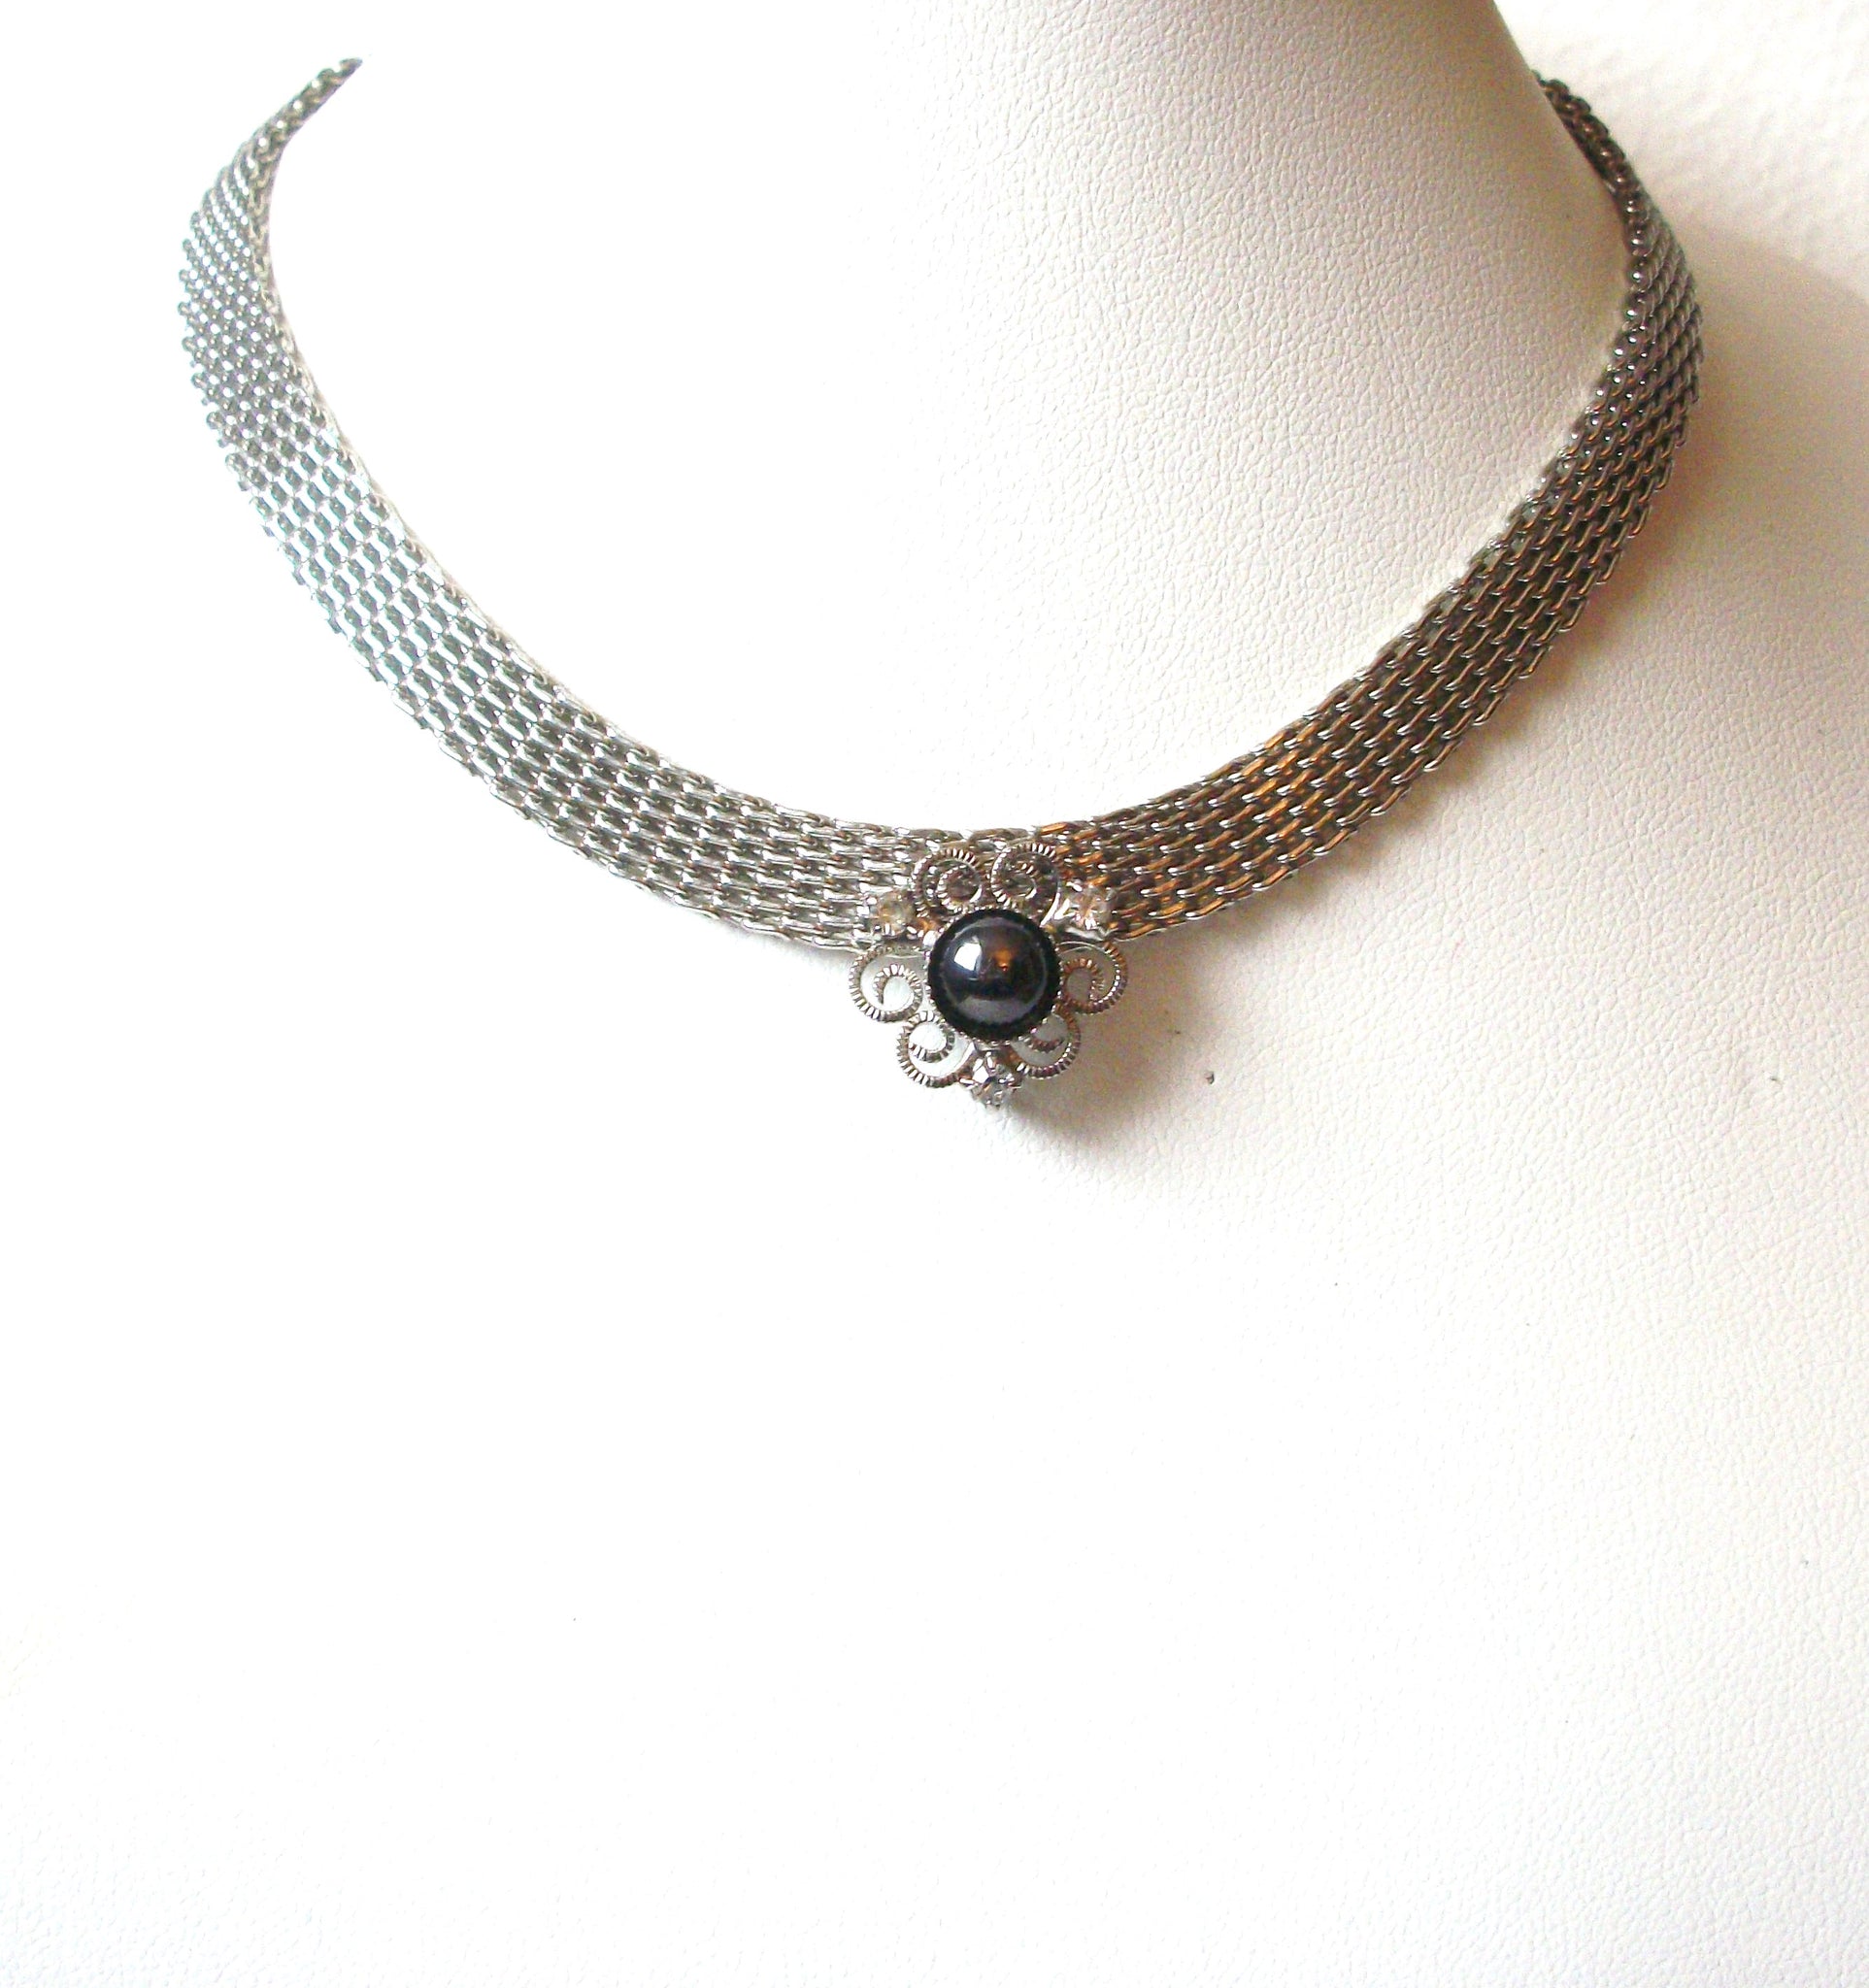 Vintage Act II Silver Toned Hematite Choker Necklace 112520